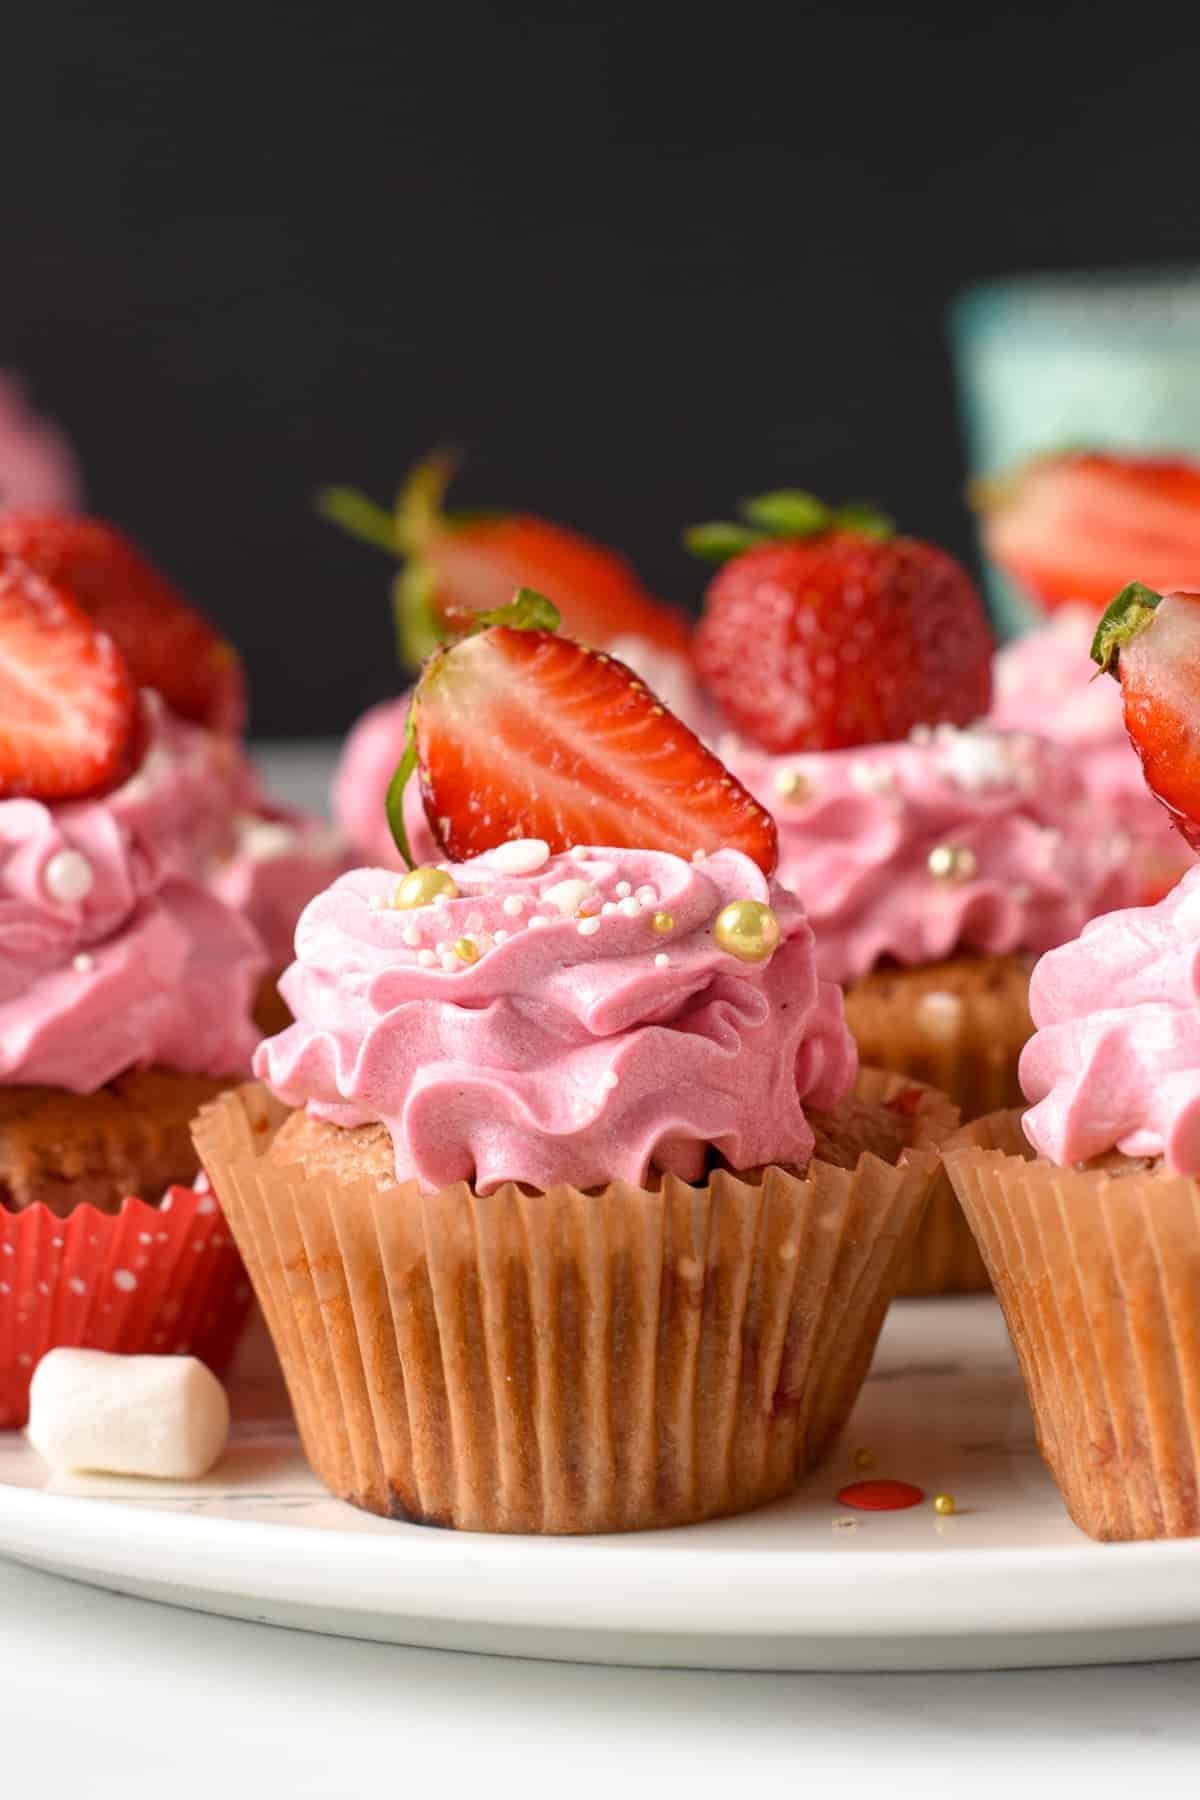 Vegan Strawberry Cupcakes egg free dairy free plant based cupcakes the conscious plant kitchen